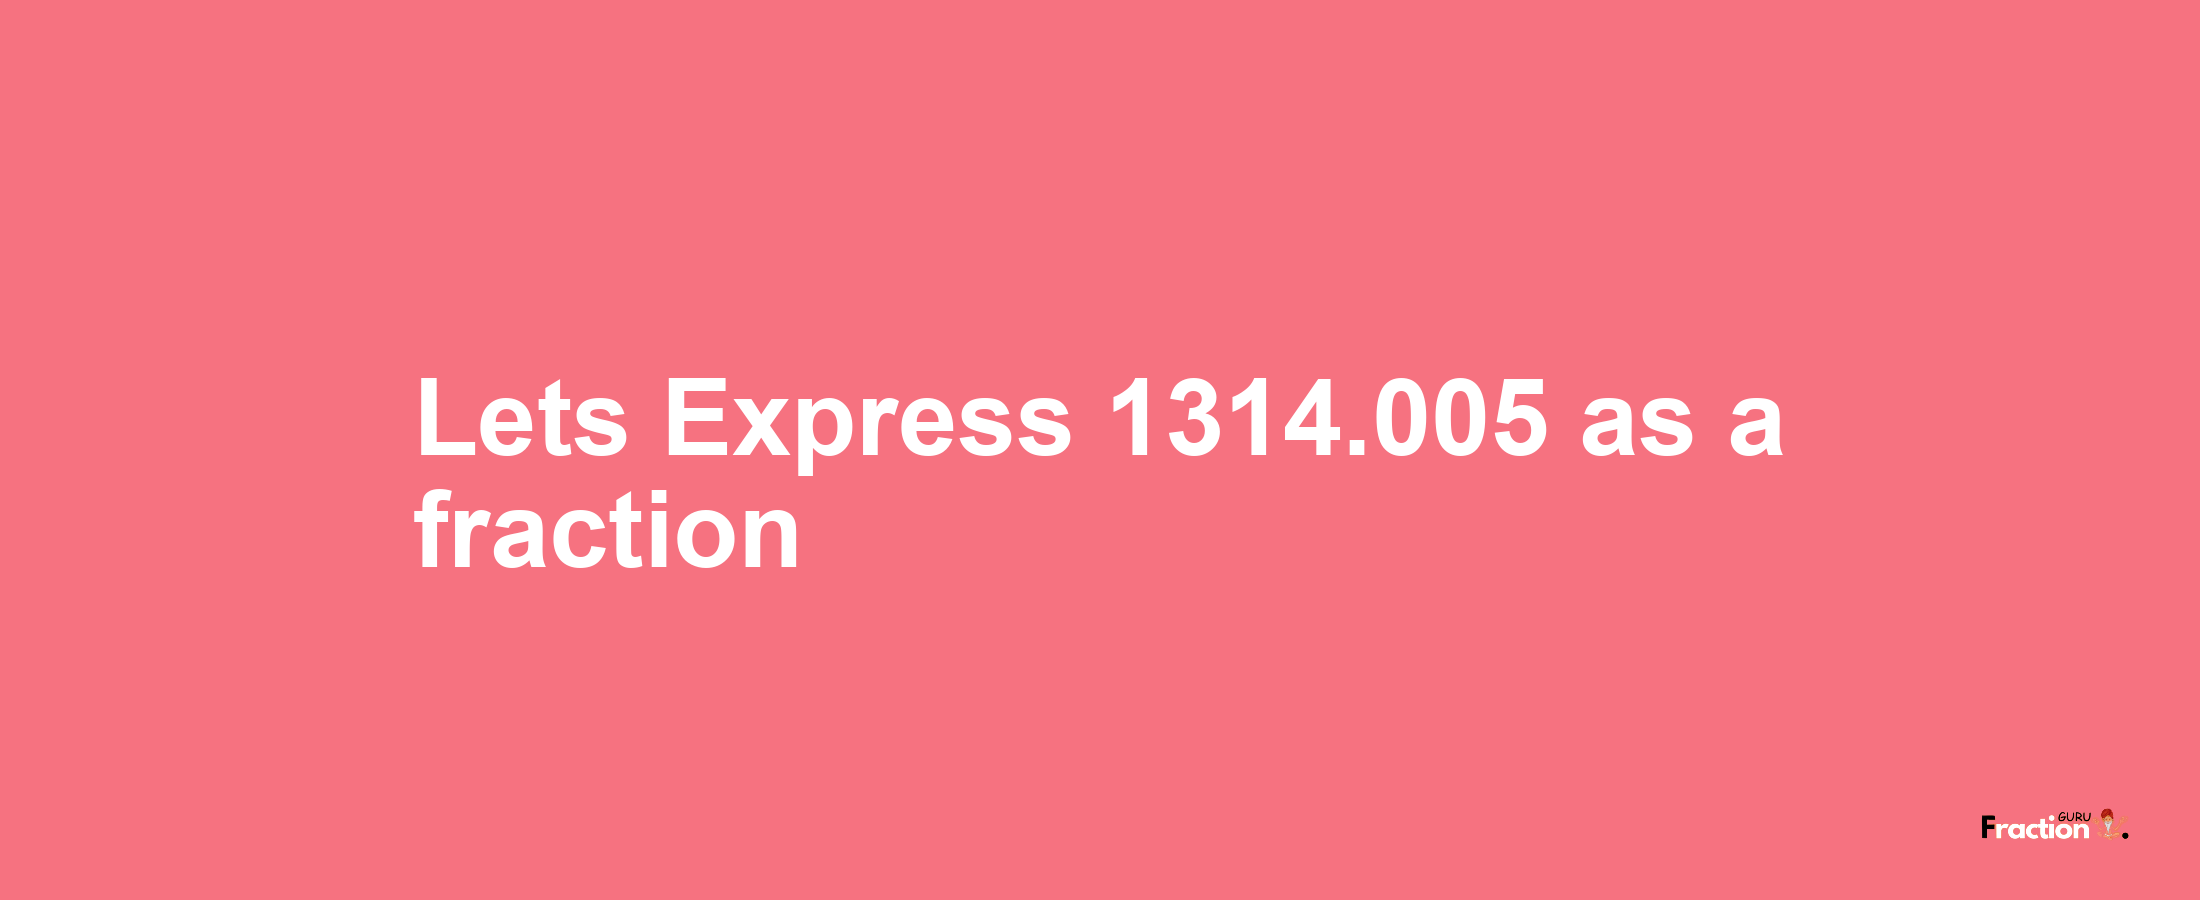 Lets Express 1314.005 as afraction